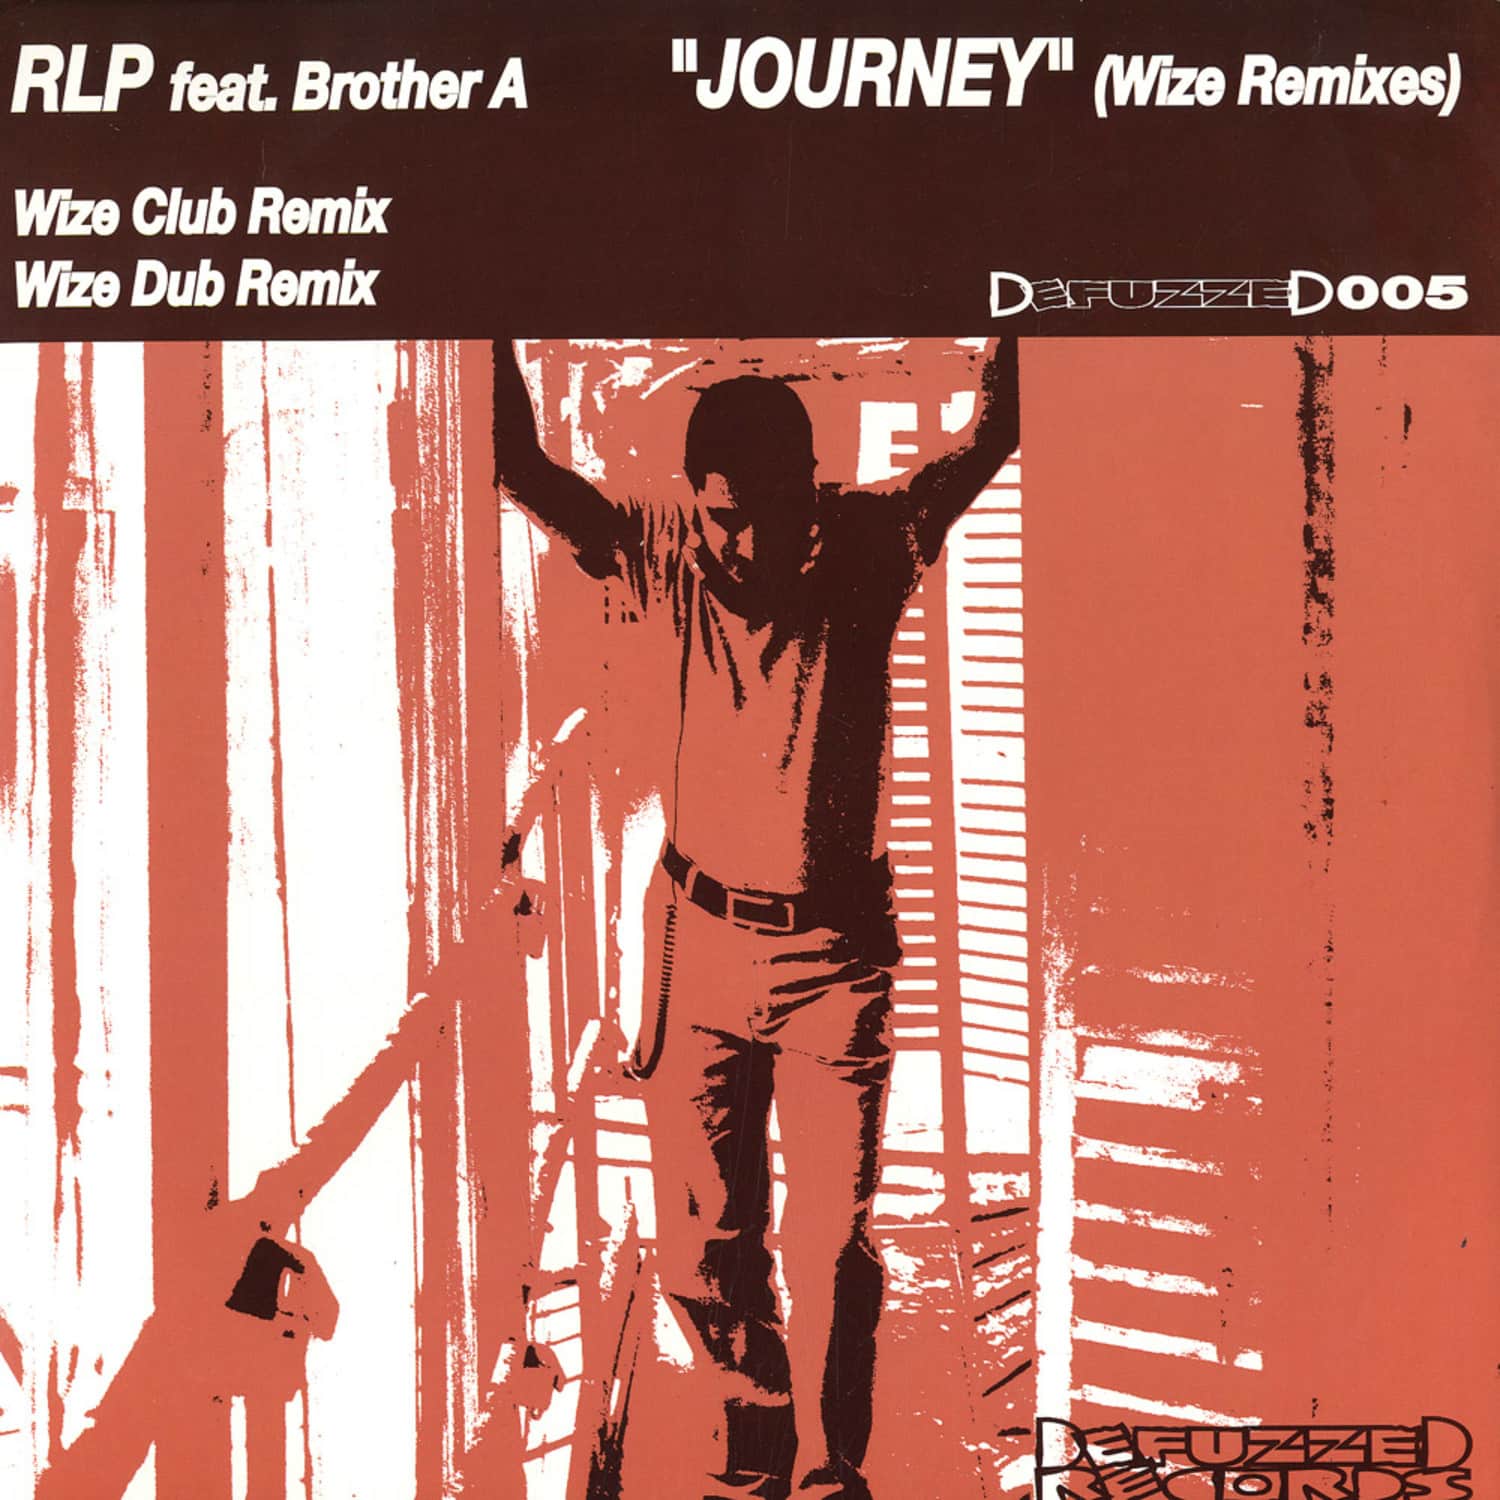 RLP ft. Brother A - JOURNEY RMX